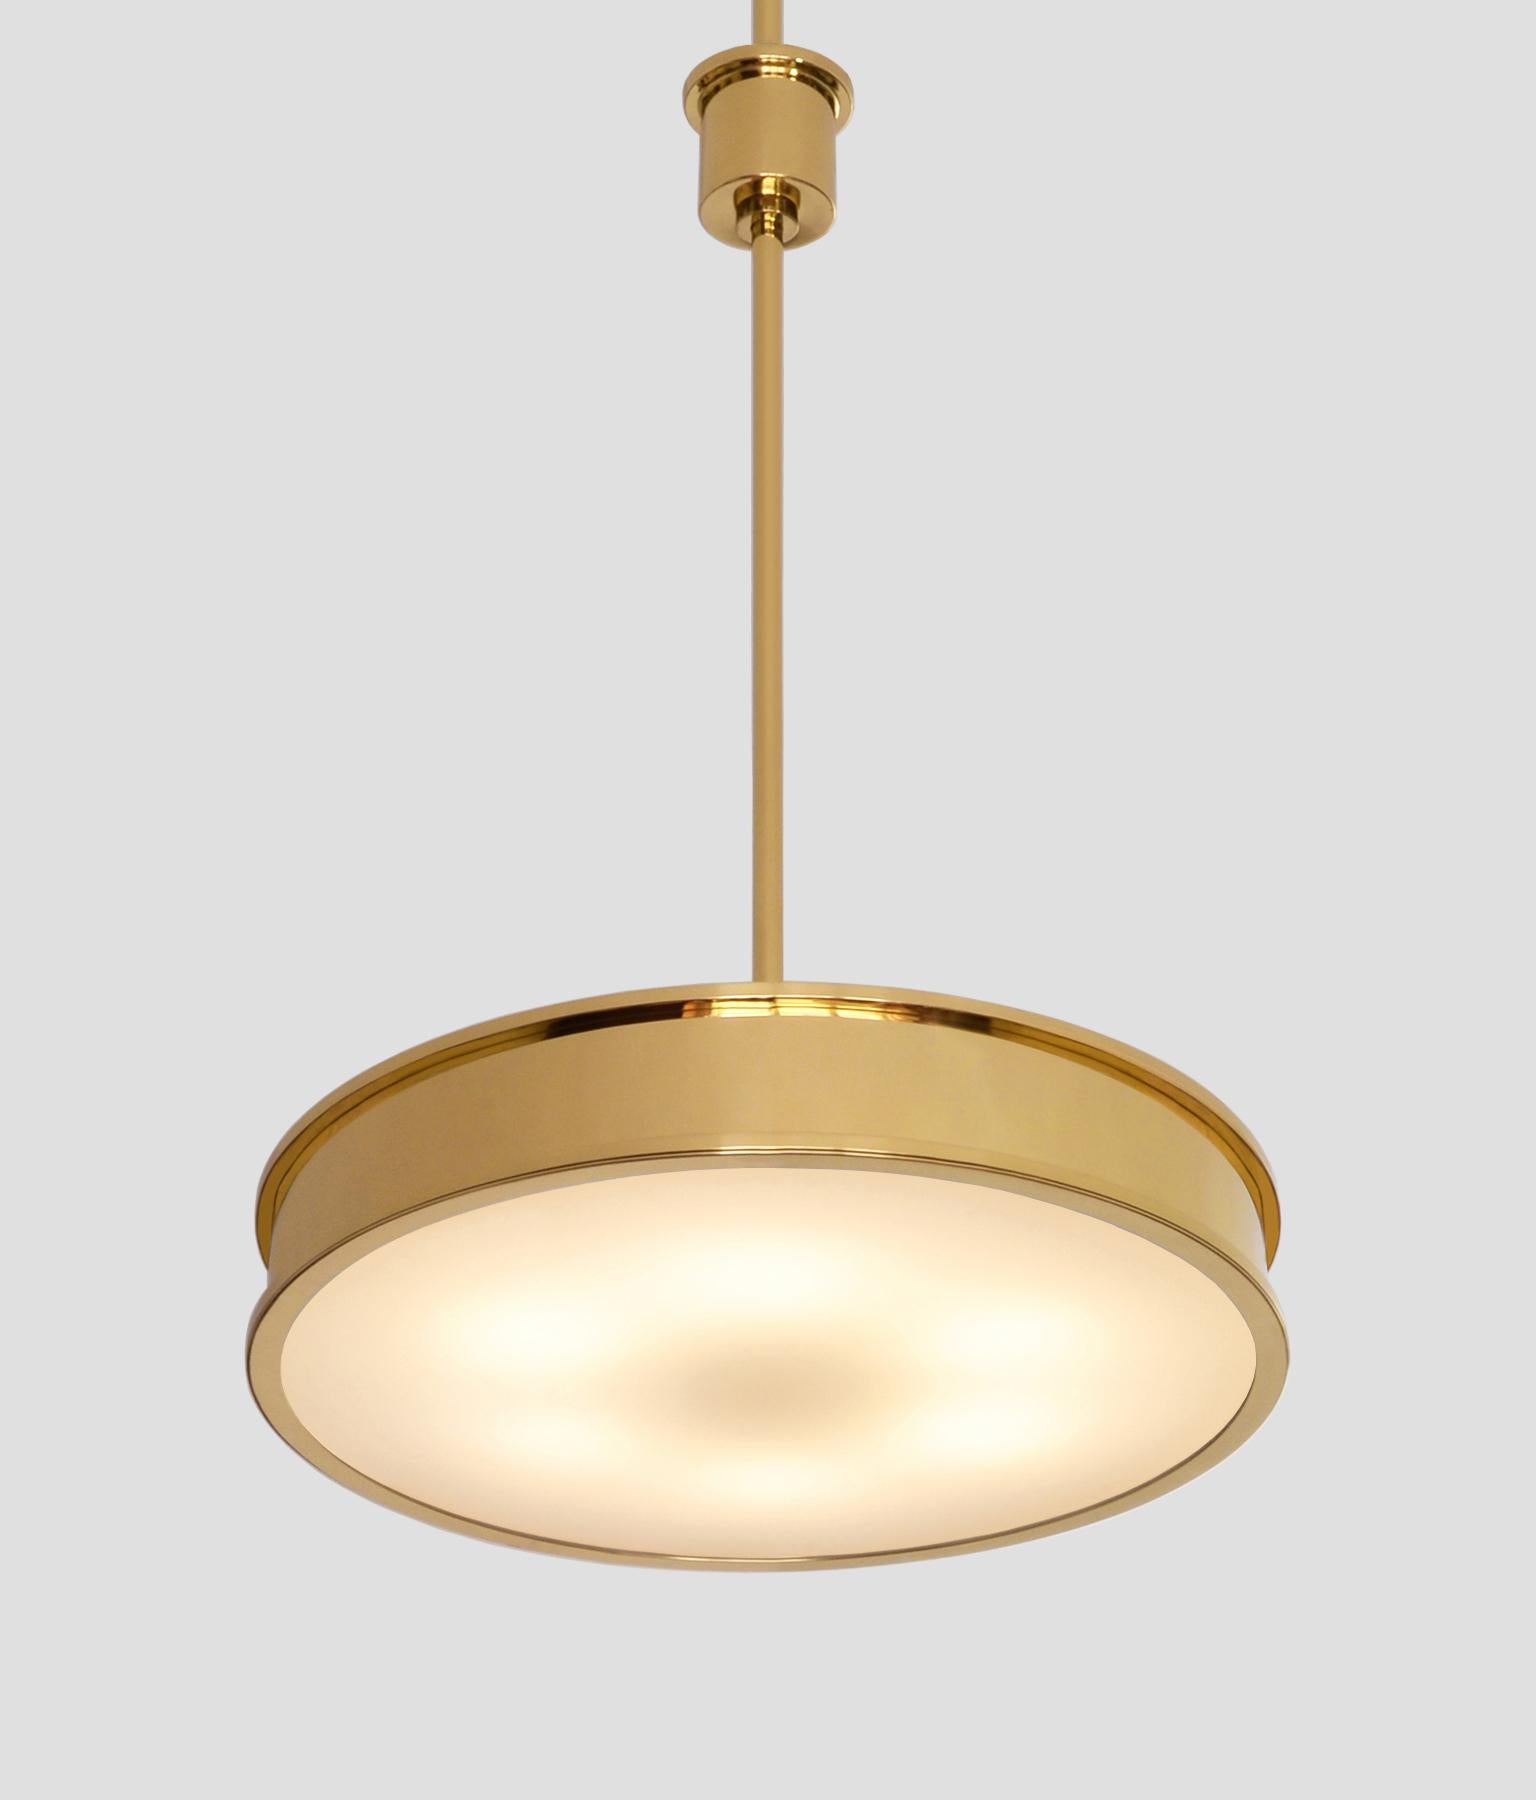 Brushed Bespoke Modernist Circular Pendant Light in Polished Brass and Opal Glass, 2018 For Sale